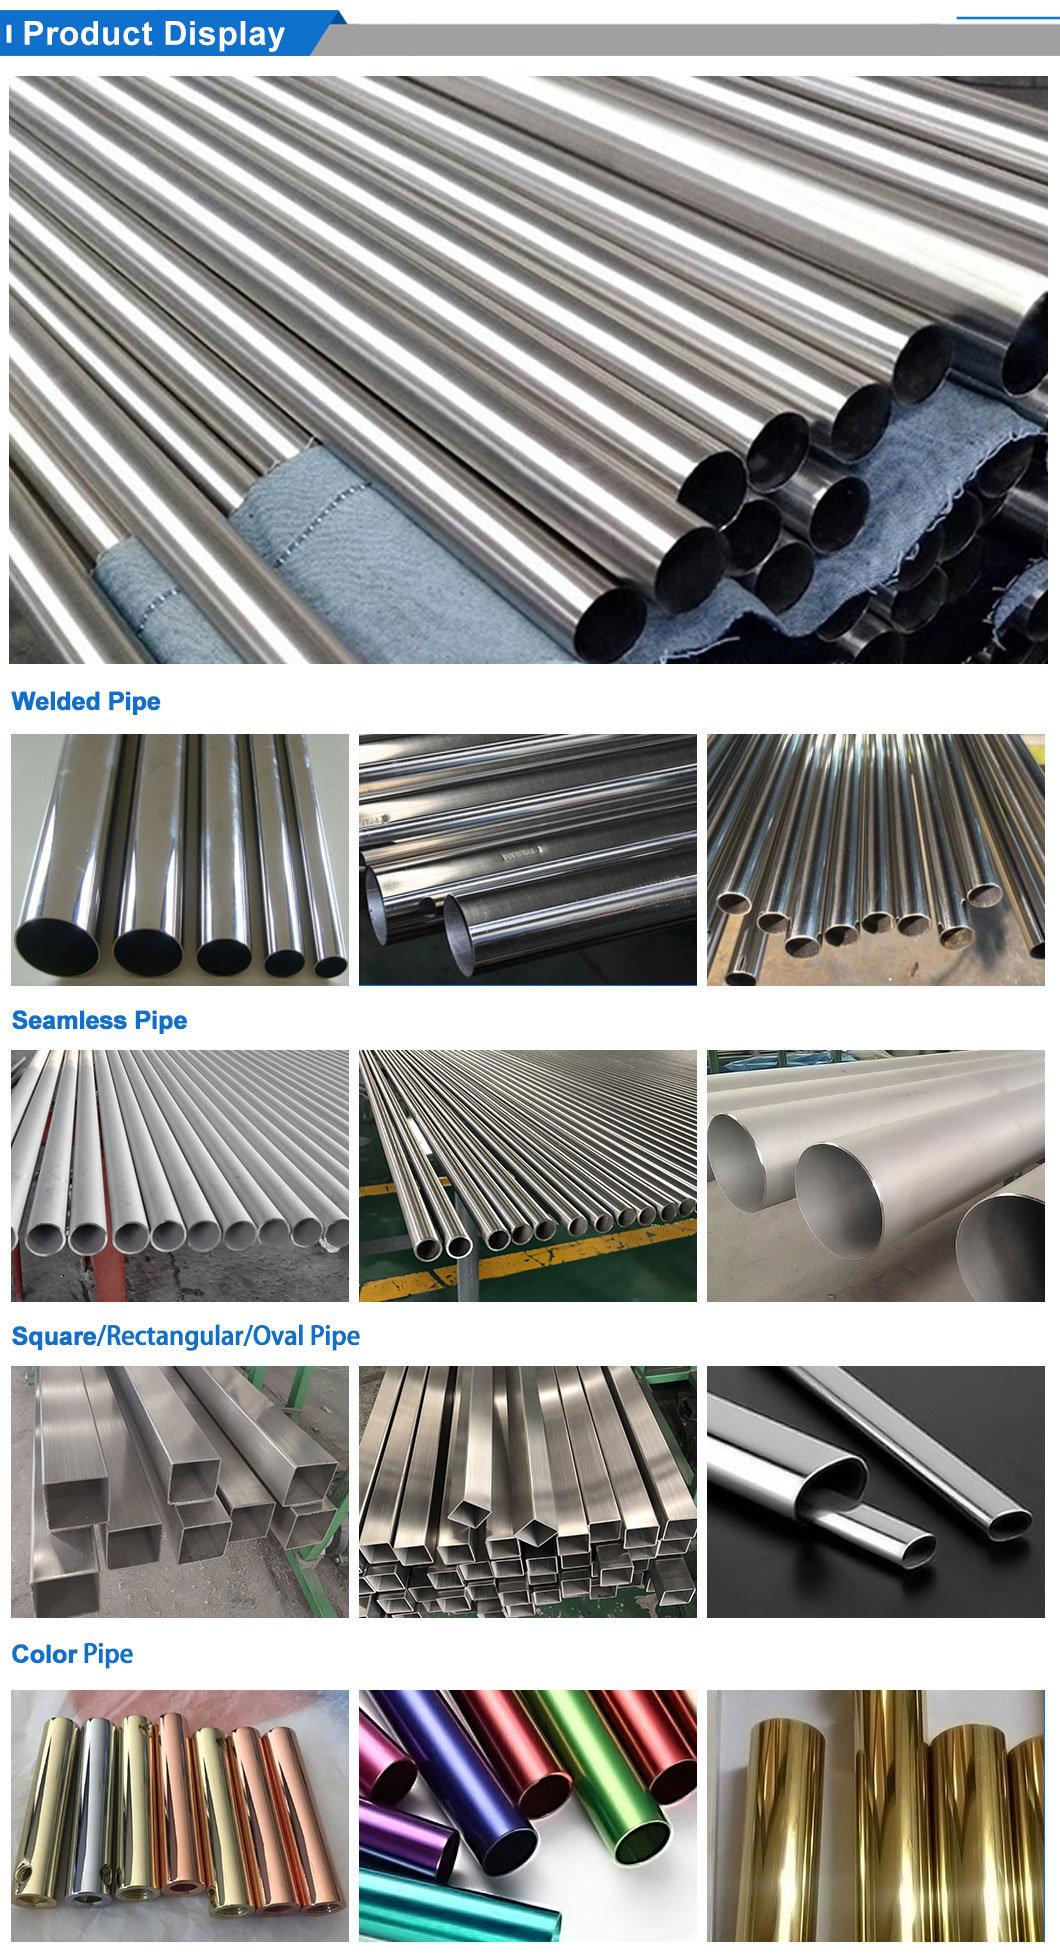 TP304 S31603 Used in Bridge Project Stainless Steel Welded Tube